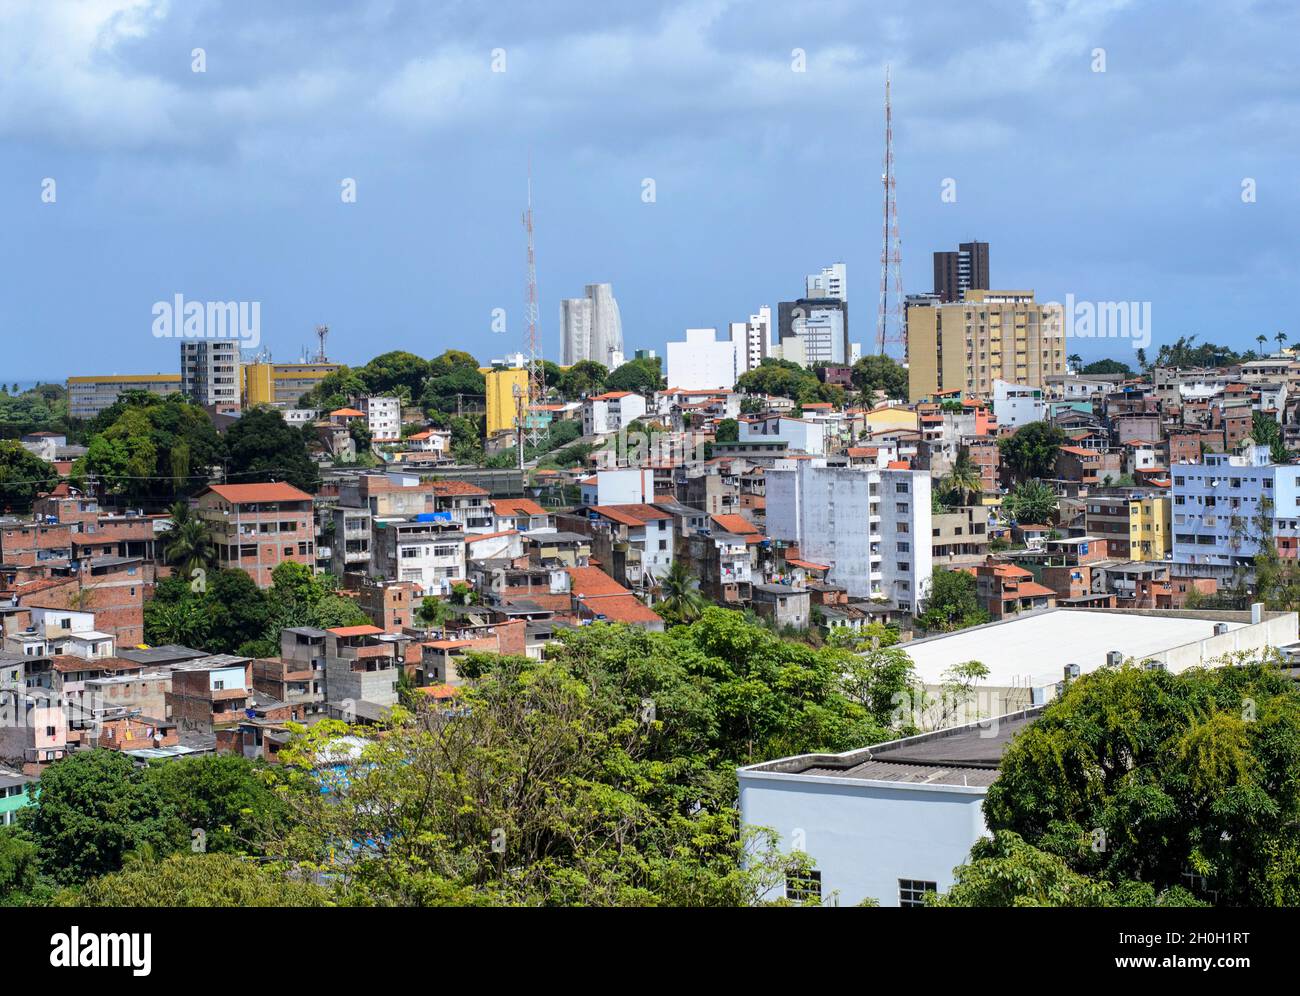 Salvador, Bahia, Brazil - April 13, 2014: View of the buildings and popular houses built in the mountains. City of Salvador, Bahia, Brazil. Stock Photo